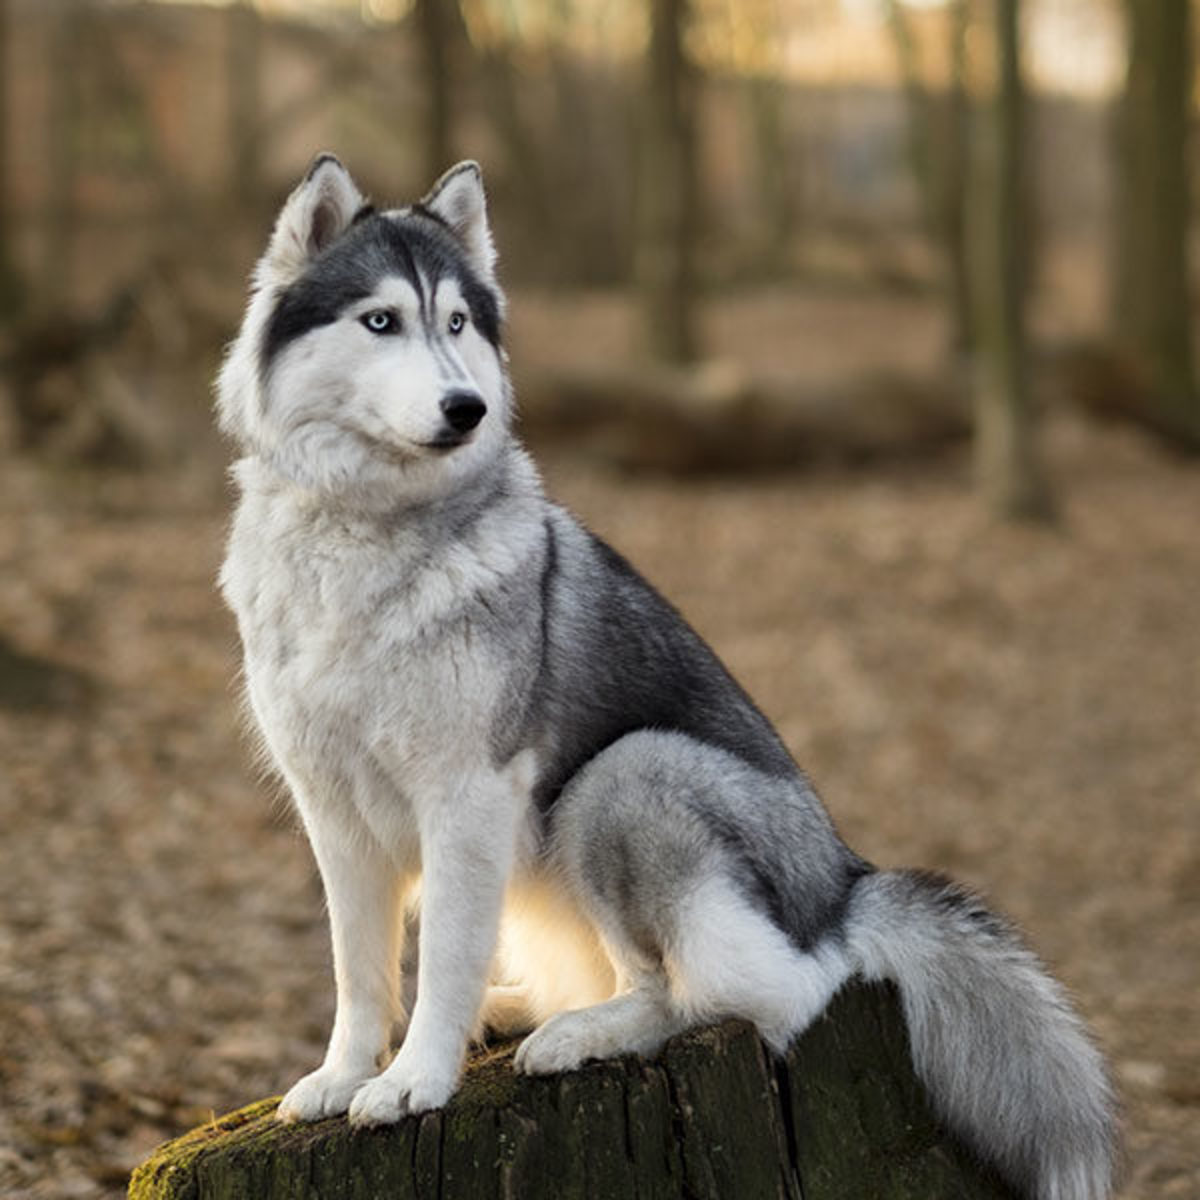 most-sought-after-dog-breeds